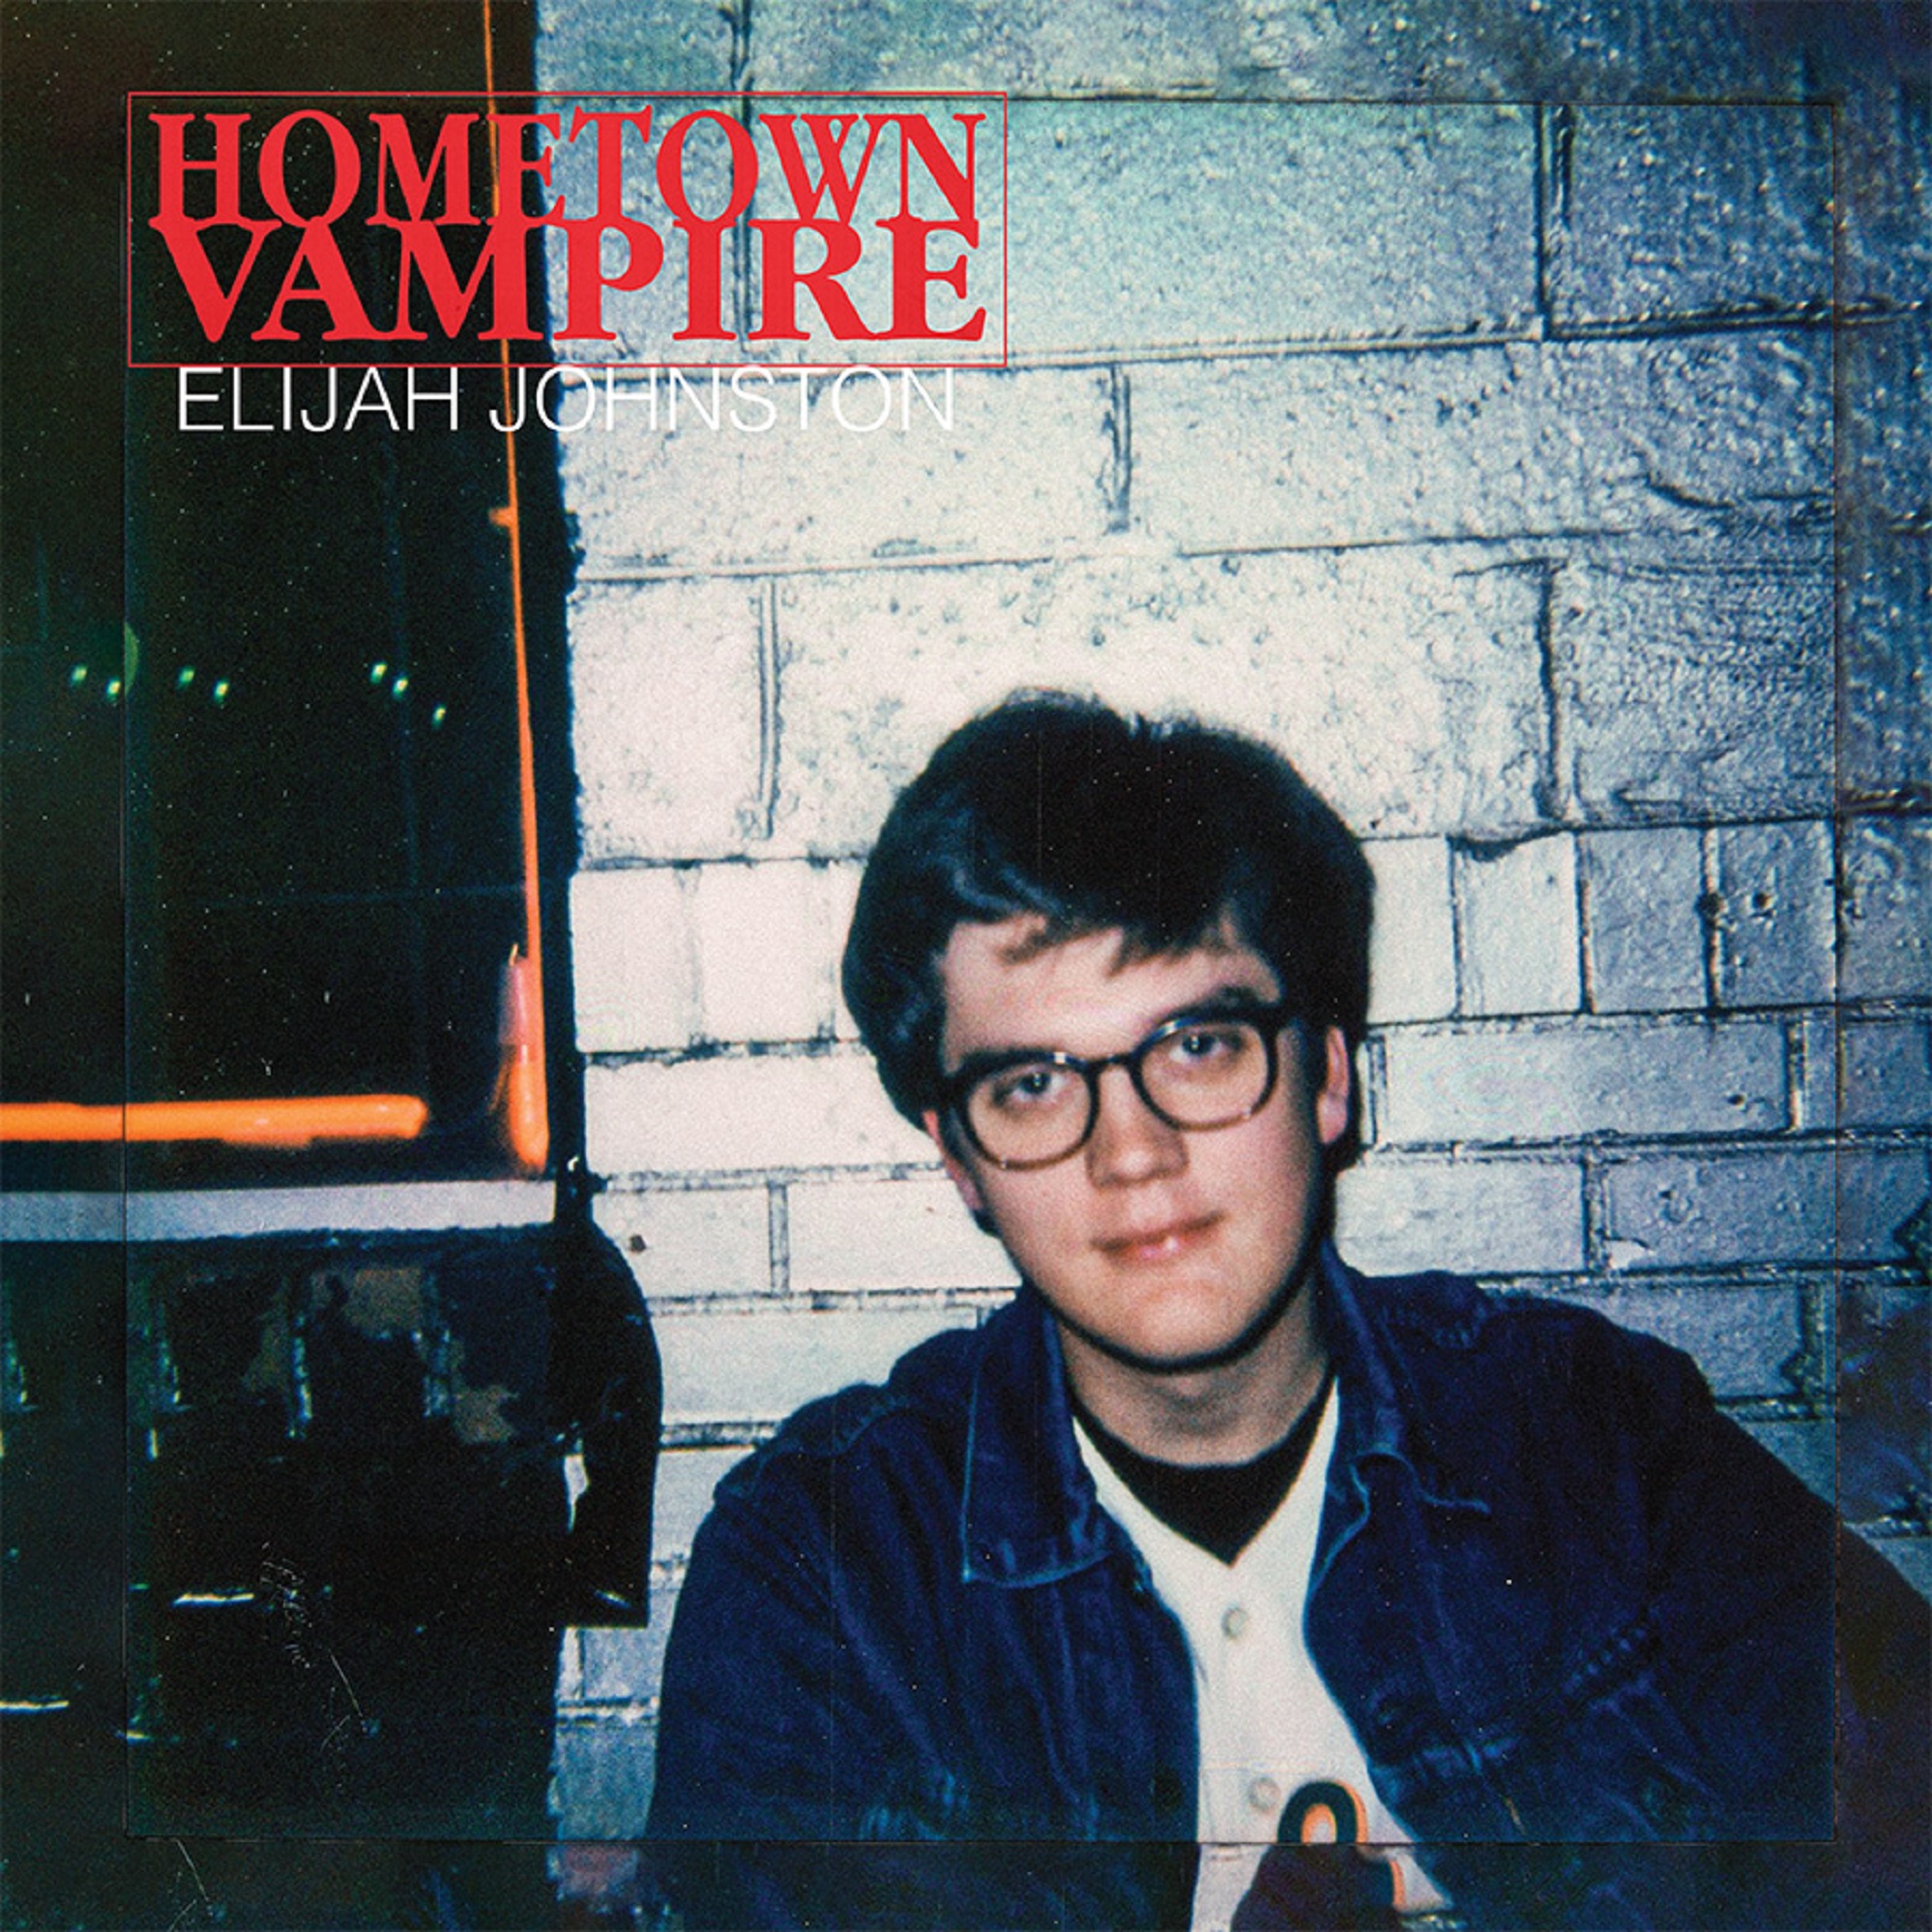 ELIJAH JOHNSTON RELEASES HOMETOWN VAMPIRE OUT TODAY ON STROLLING BONES RECORDS